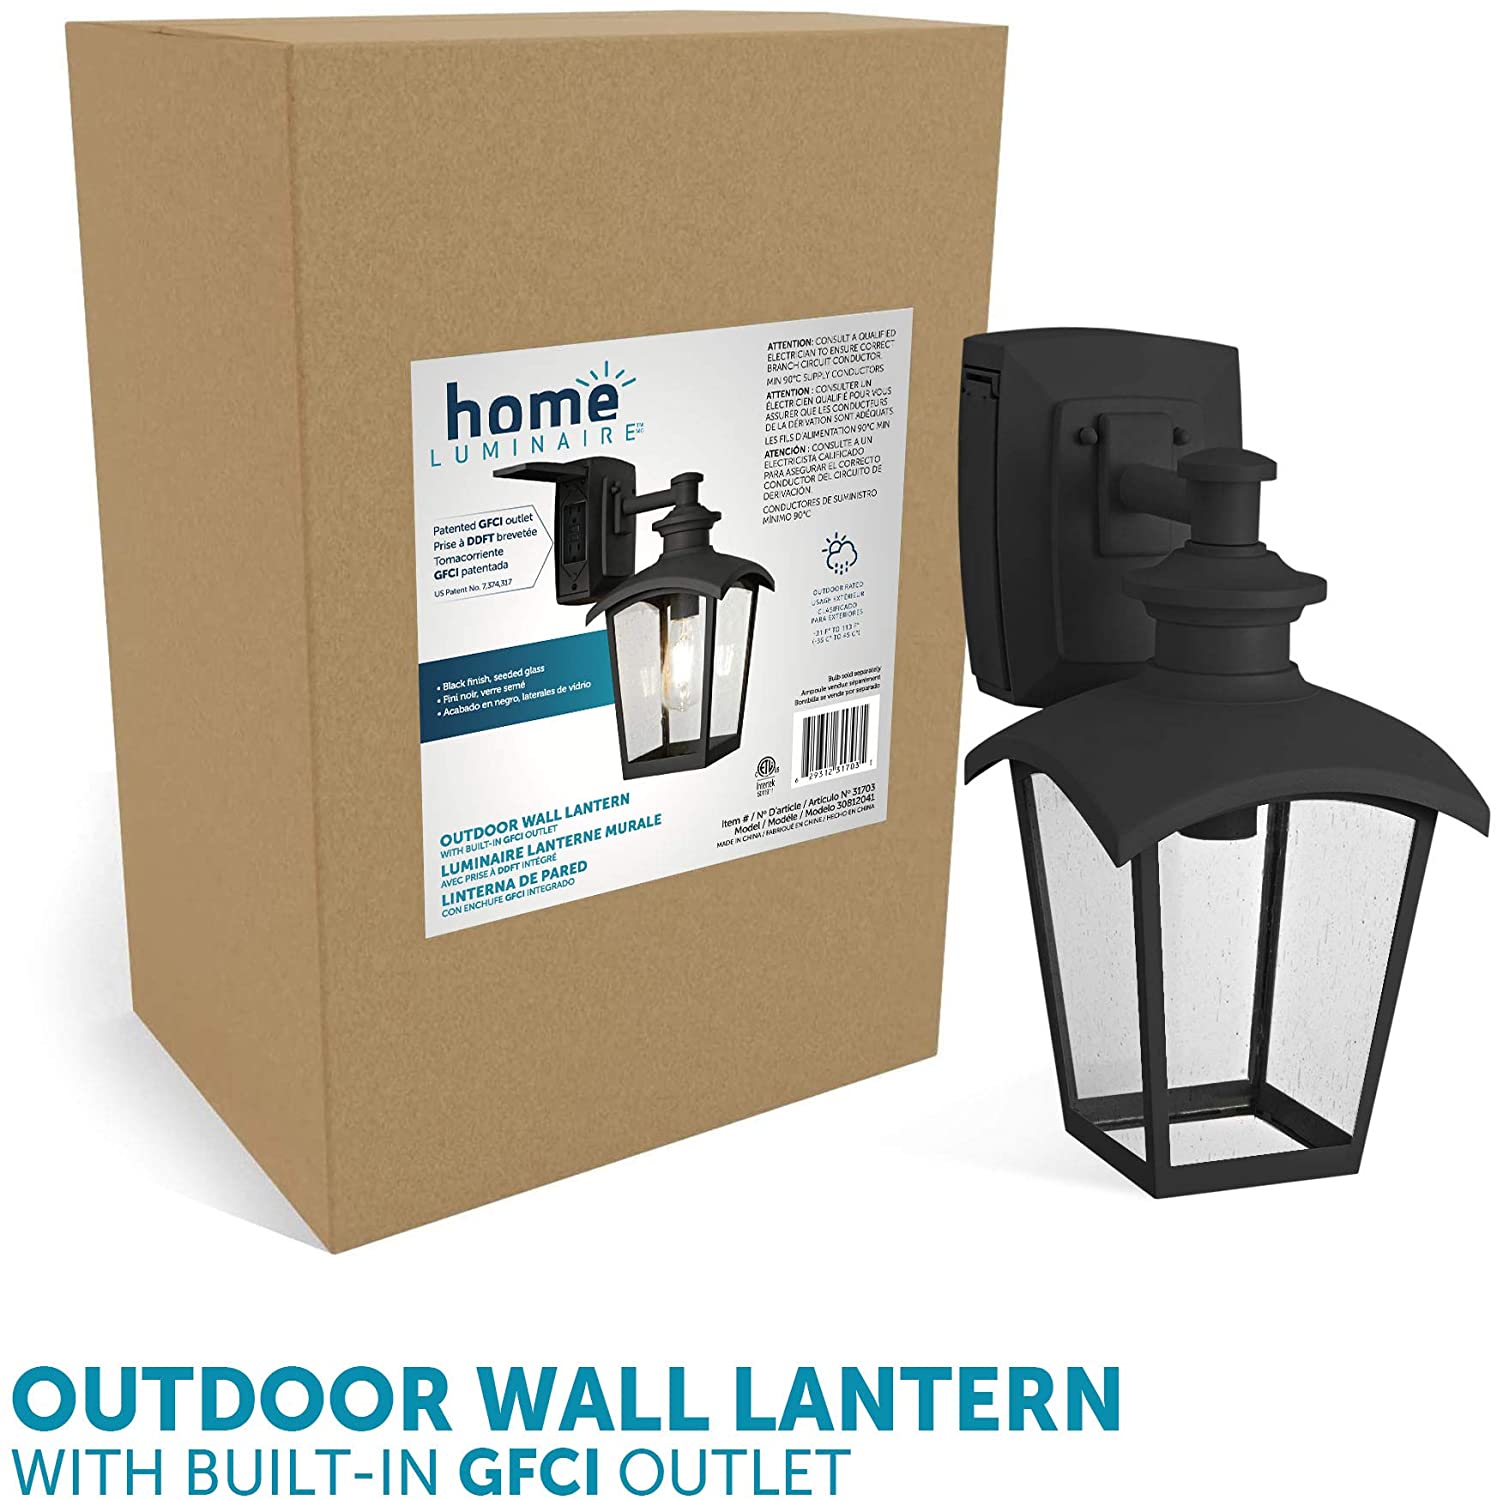 1 light lantern black wall sconce with seeded glass shade